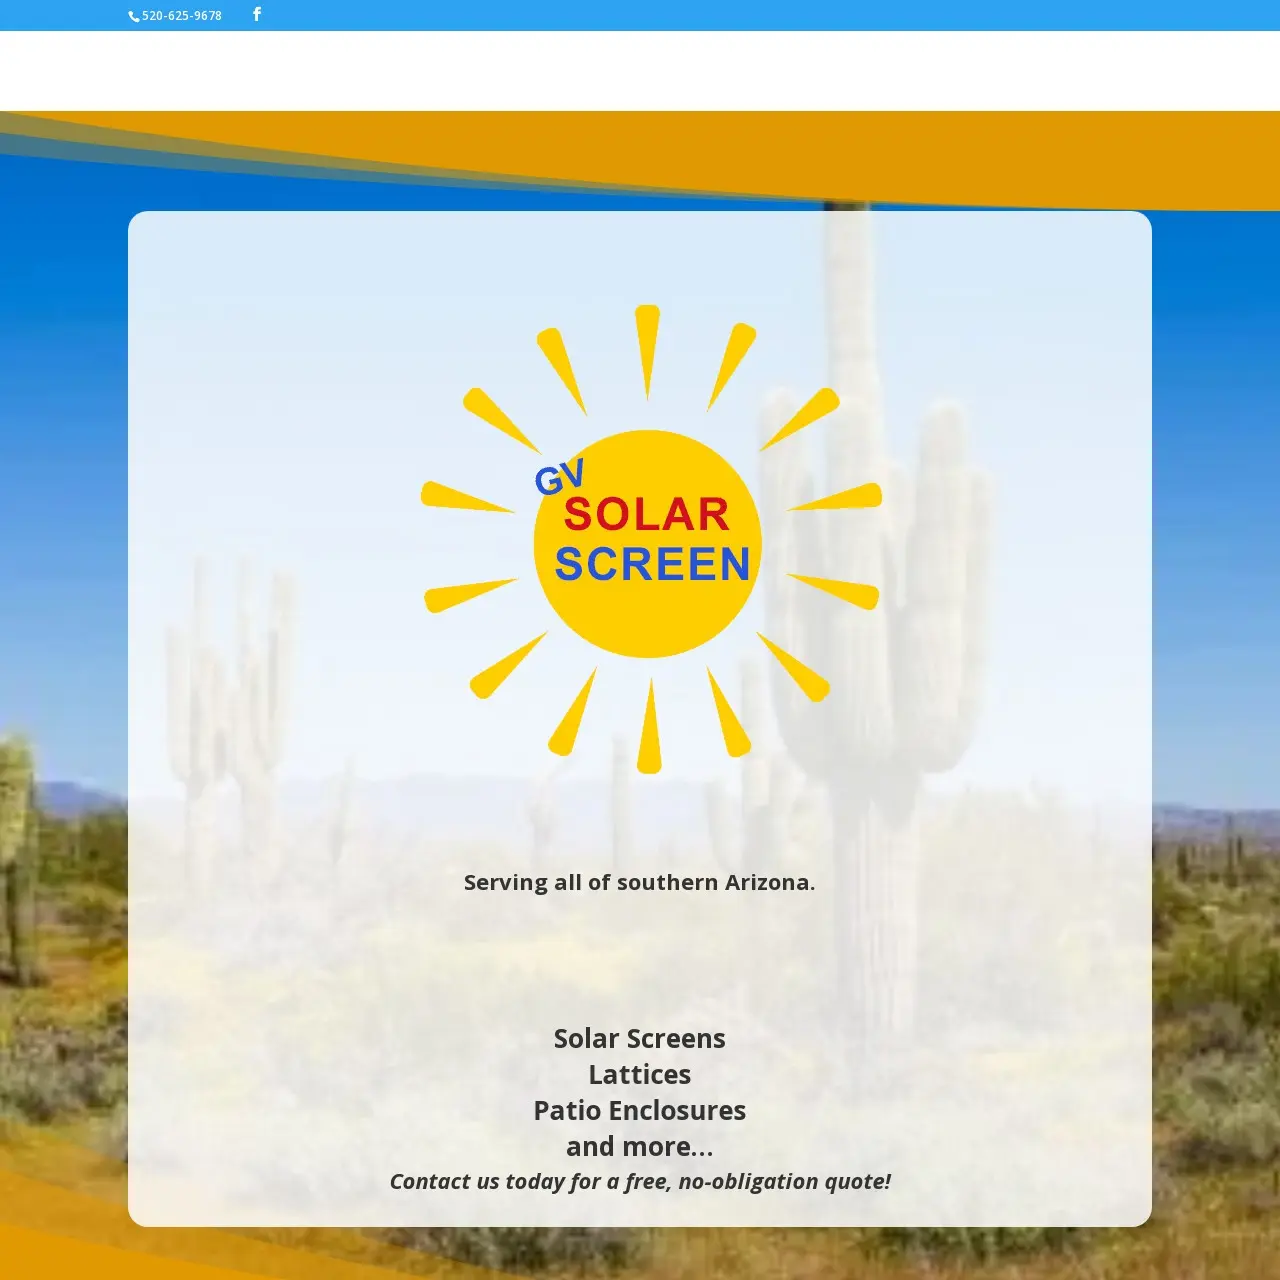 Experience the harmony of aesthetics and sustainability as Shield Bar Marketing updates the logo and designs a captivating landing page for Green Valley Solar Screens, providing prospective customers with valuable information and a glimpse into their energy-efficient solutions.